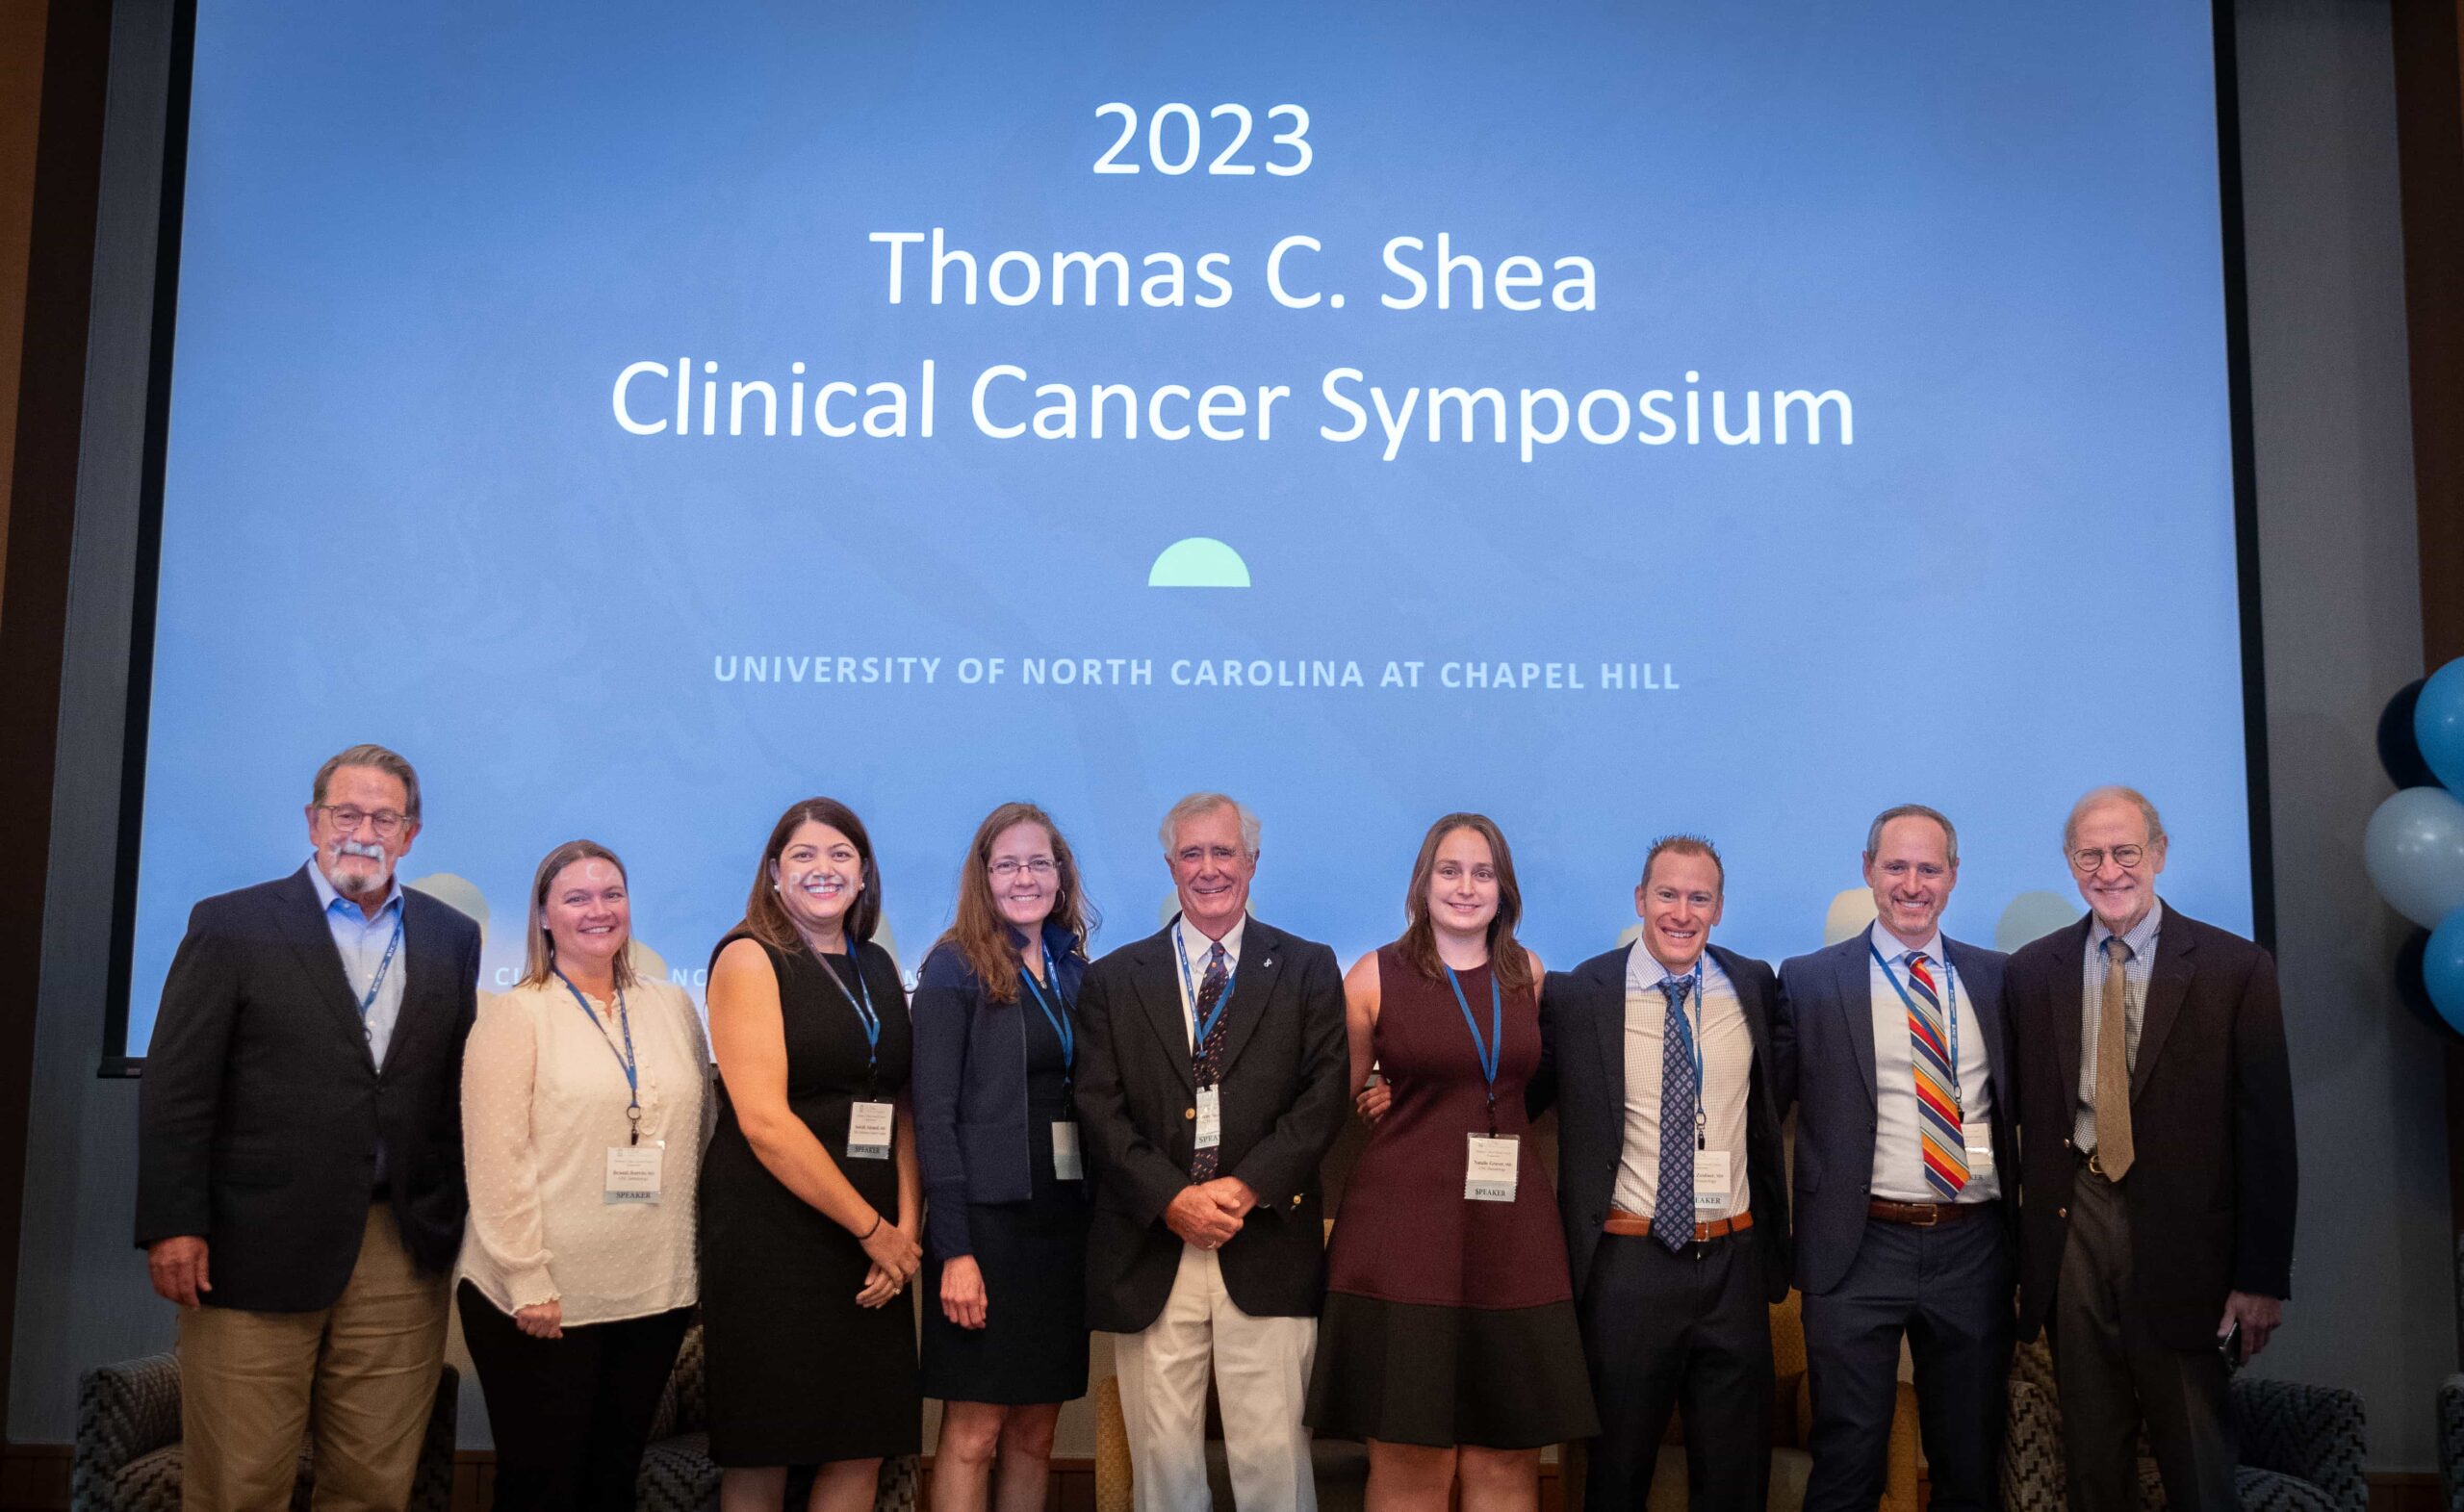 Thomas C. Shea Clinical Cancer Symposium brings together national leaders in blood cancers